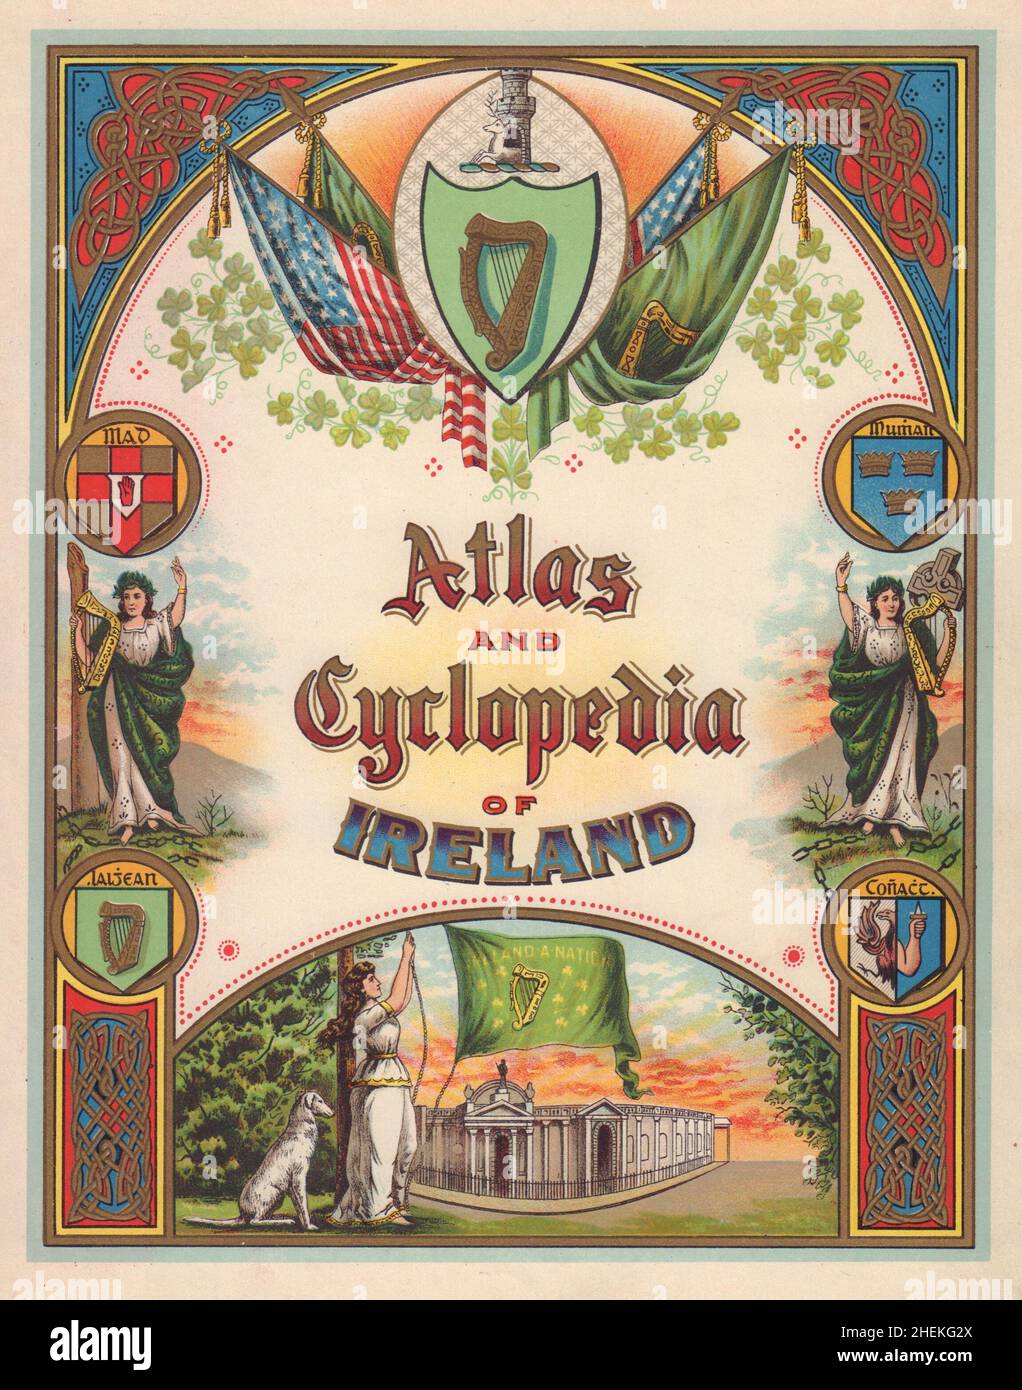 Atlas and Cyclopedia of Ireland [title page]. JOYCE 1905 old antique print Stock Photo